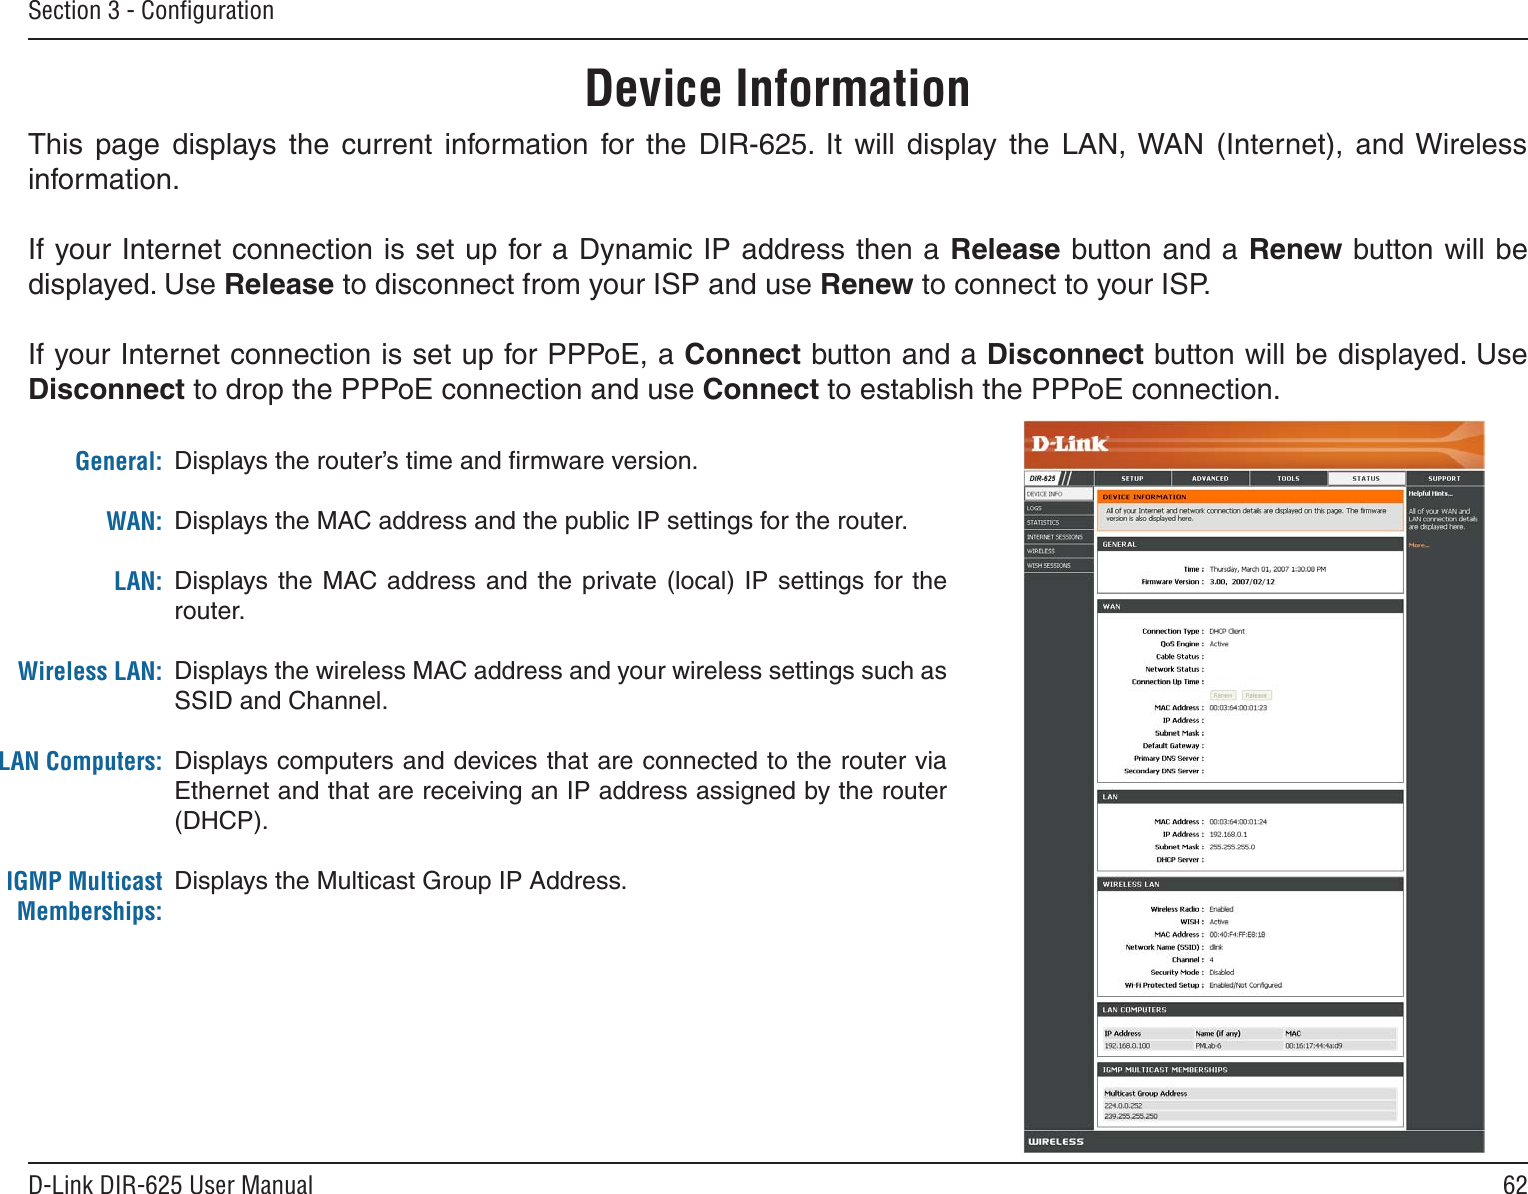 62D-Link DIR-625 User ManualSection 3 - ConﬁgurationThis  page  displays  the  current  information  for  the  DIR-625.  It  will  display  the  LAN, WAN  (Internet),  and Wireless information.If your Internet connection is set up for a Dynamic IP address then a Release button and a Renew button will be displayed. Use Release to disconnect from your ISP and use Renew to connect to your ISP. If your Internet connection is set up for PPPoE, a Connect button and a Disconnect button will be displayed. Use Disconnect to drop the PPPoE connection and use Connect to establish the PPPoE connection.Displays the router’s time and ﬁrmware version.Displays the MAC address and the public IP settings for the router.Displays  the  MAC address and the  private  (local)  IP settings for  the router.Displays the wireless MAC address and your wireless settings such as SSID and Channel.Displays computers and devices that are connected to the router via Ethernet and that are receiving an IP address assigned by the router (DHCP). Displays the Multicast Group IP Address.General:WAN:LAN:Wireless LAN:LAN Computers:IGMP Multicast Memberships:Device Information